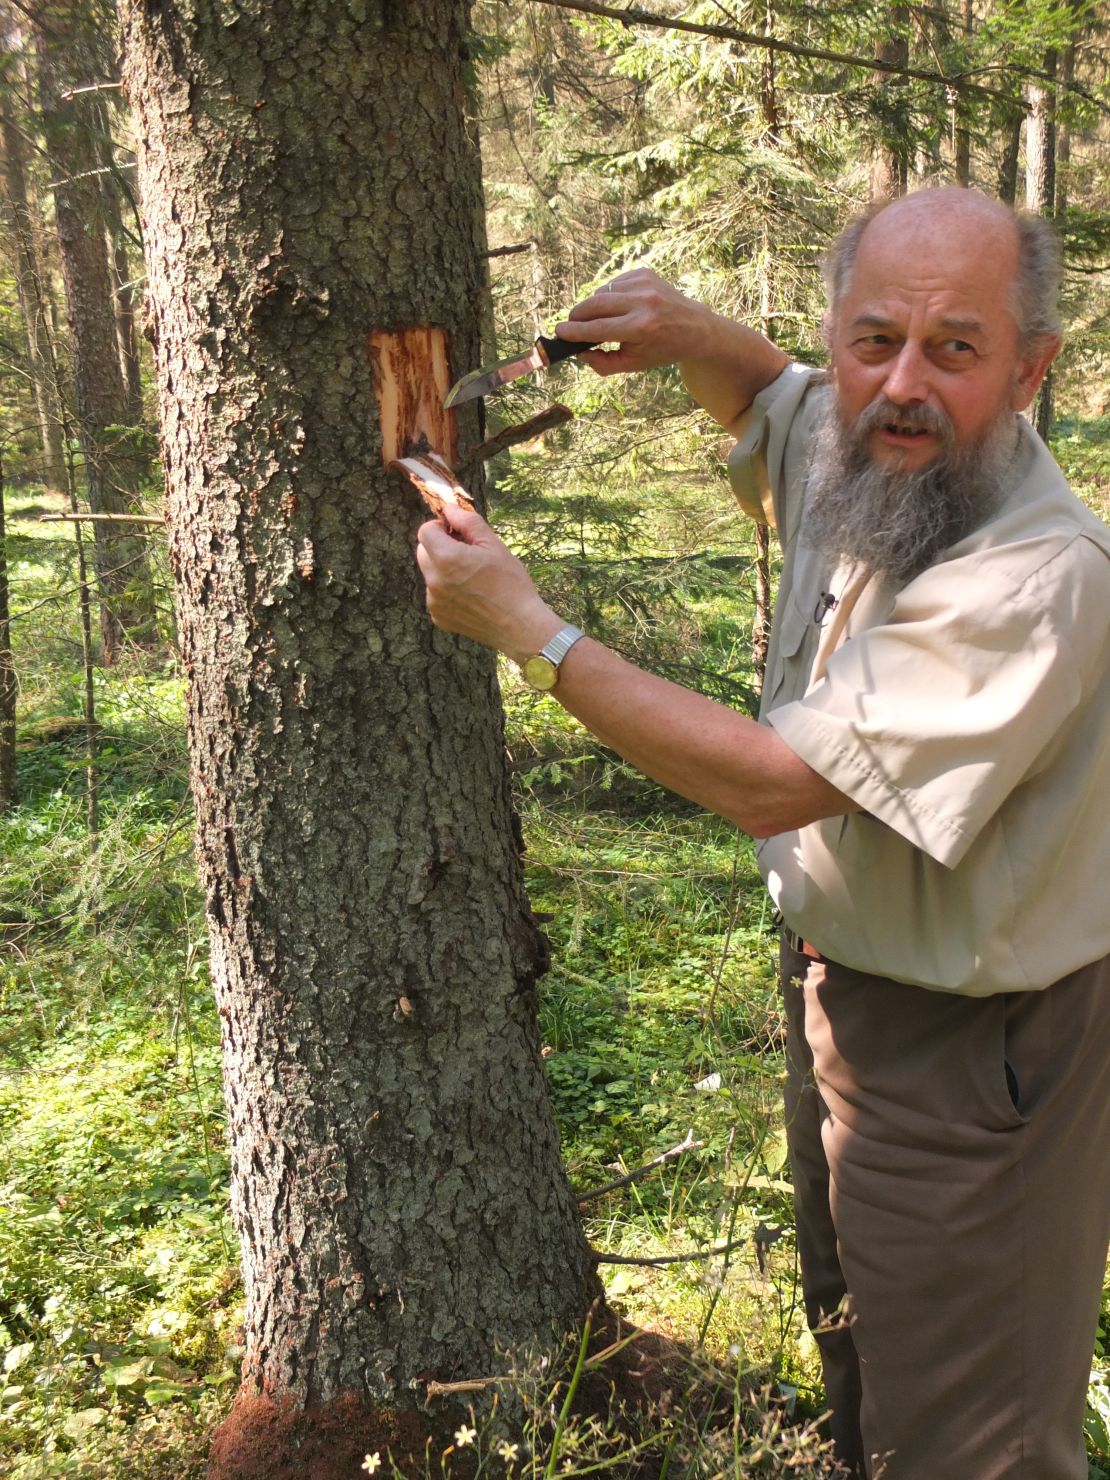 Forester Andrzej Antczak, says these spruce trees need to be cut down to stop the spread.